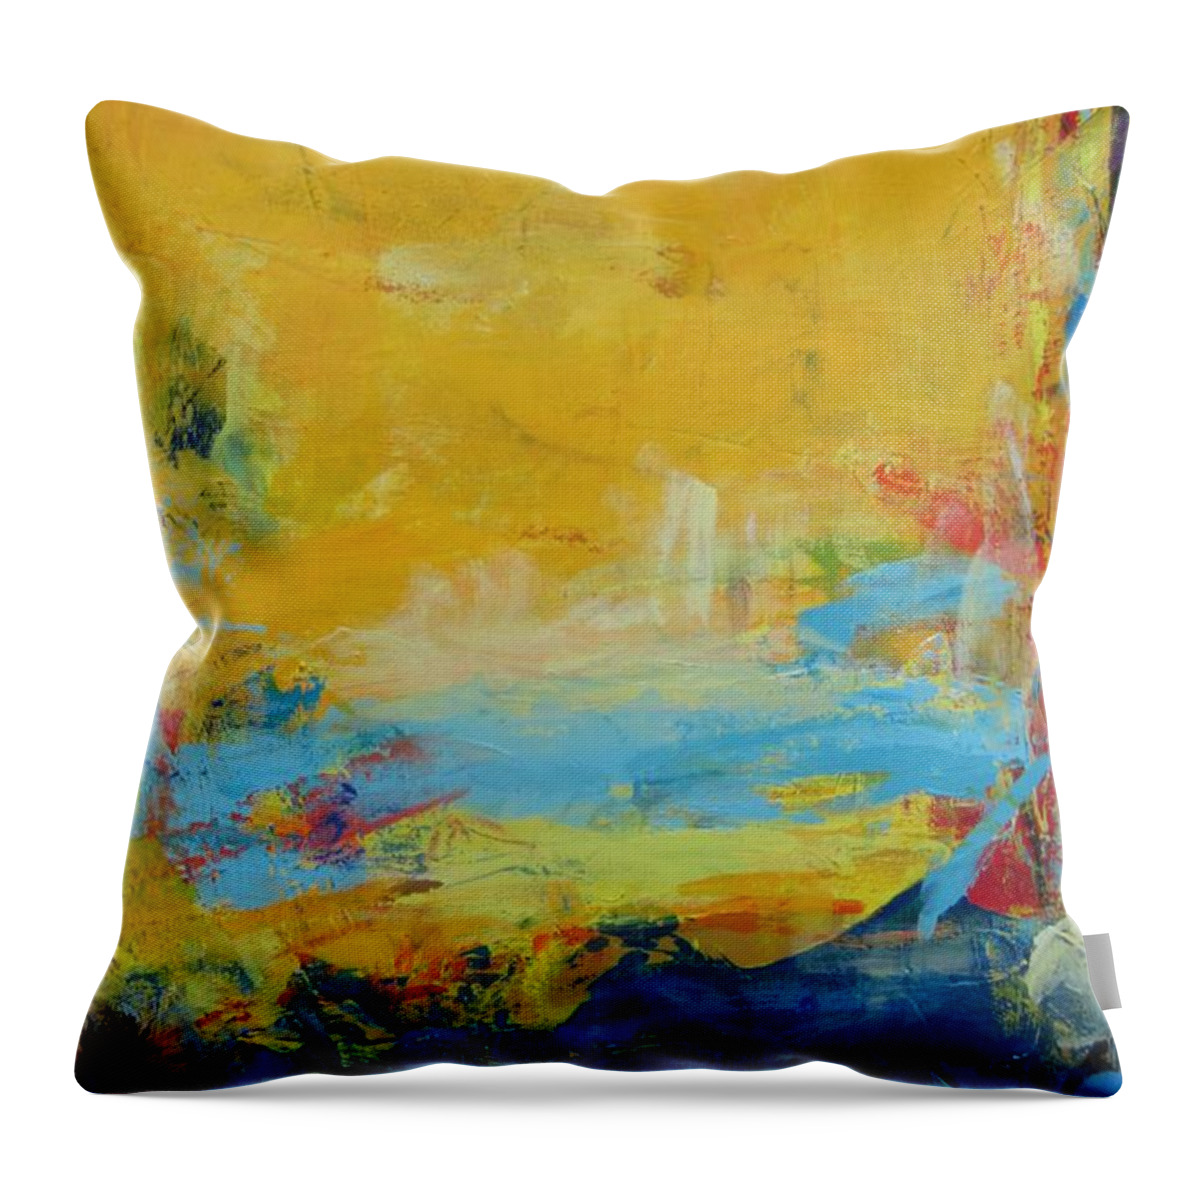 Art Throw Pillow featuring the painting Oui by Francine Ethier